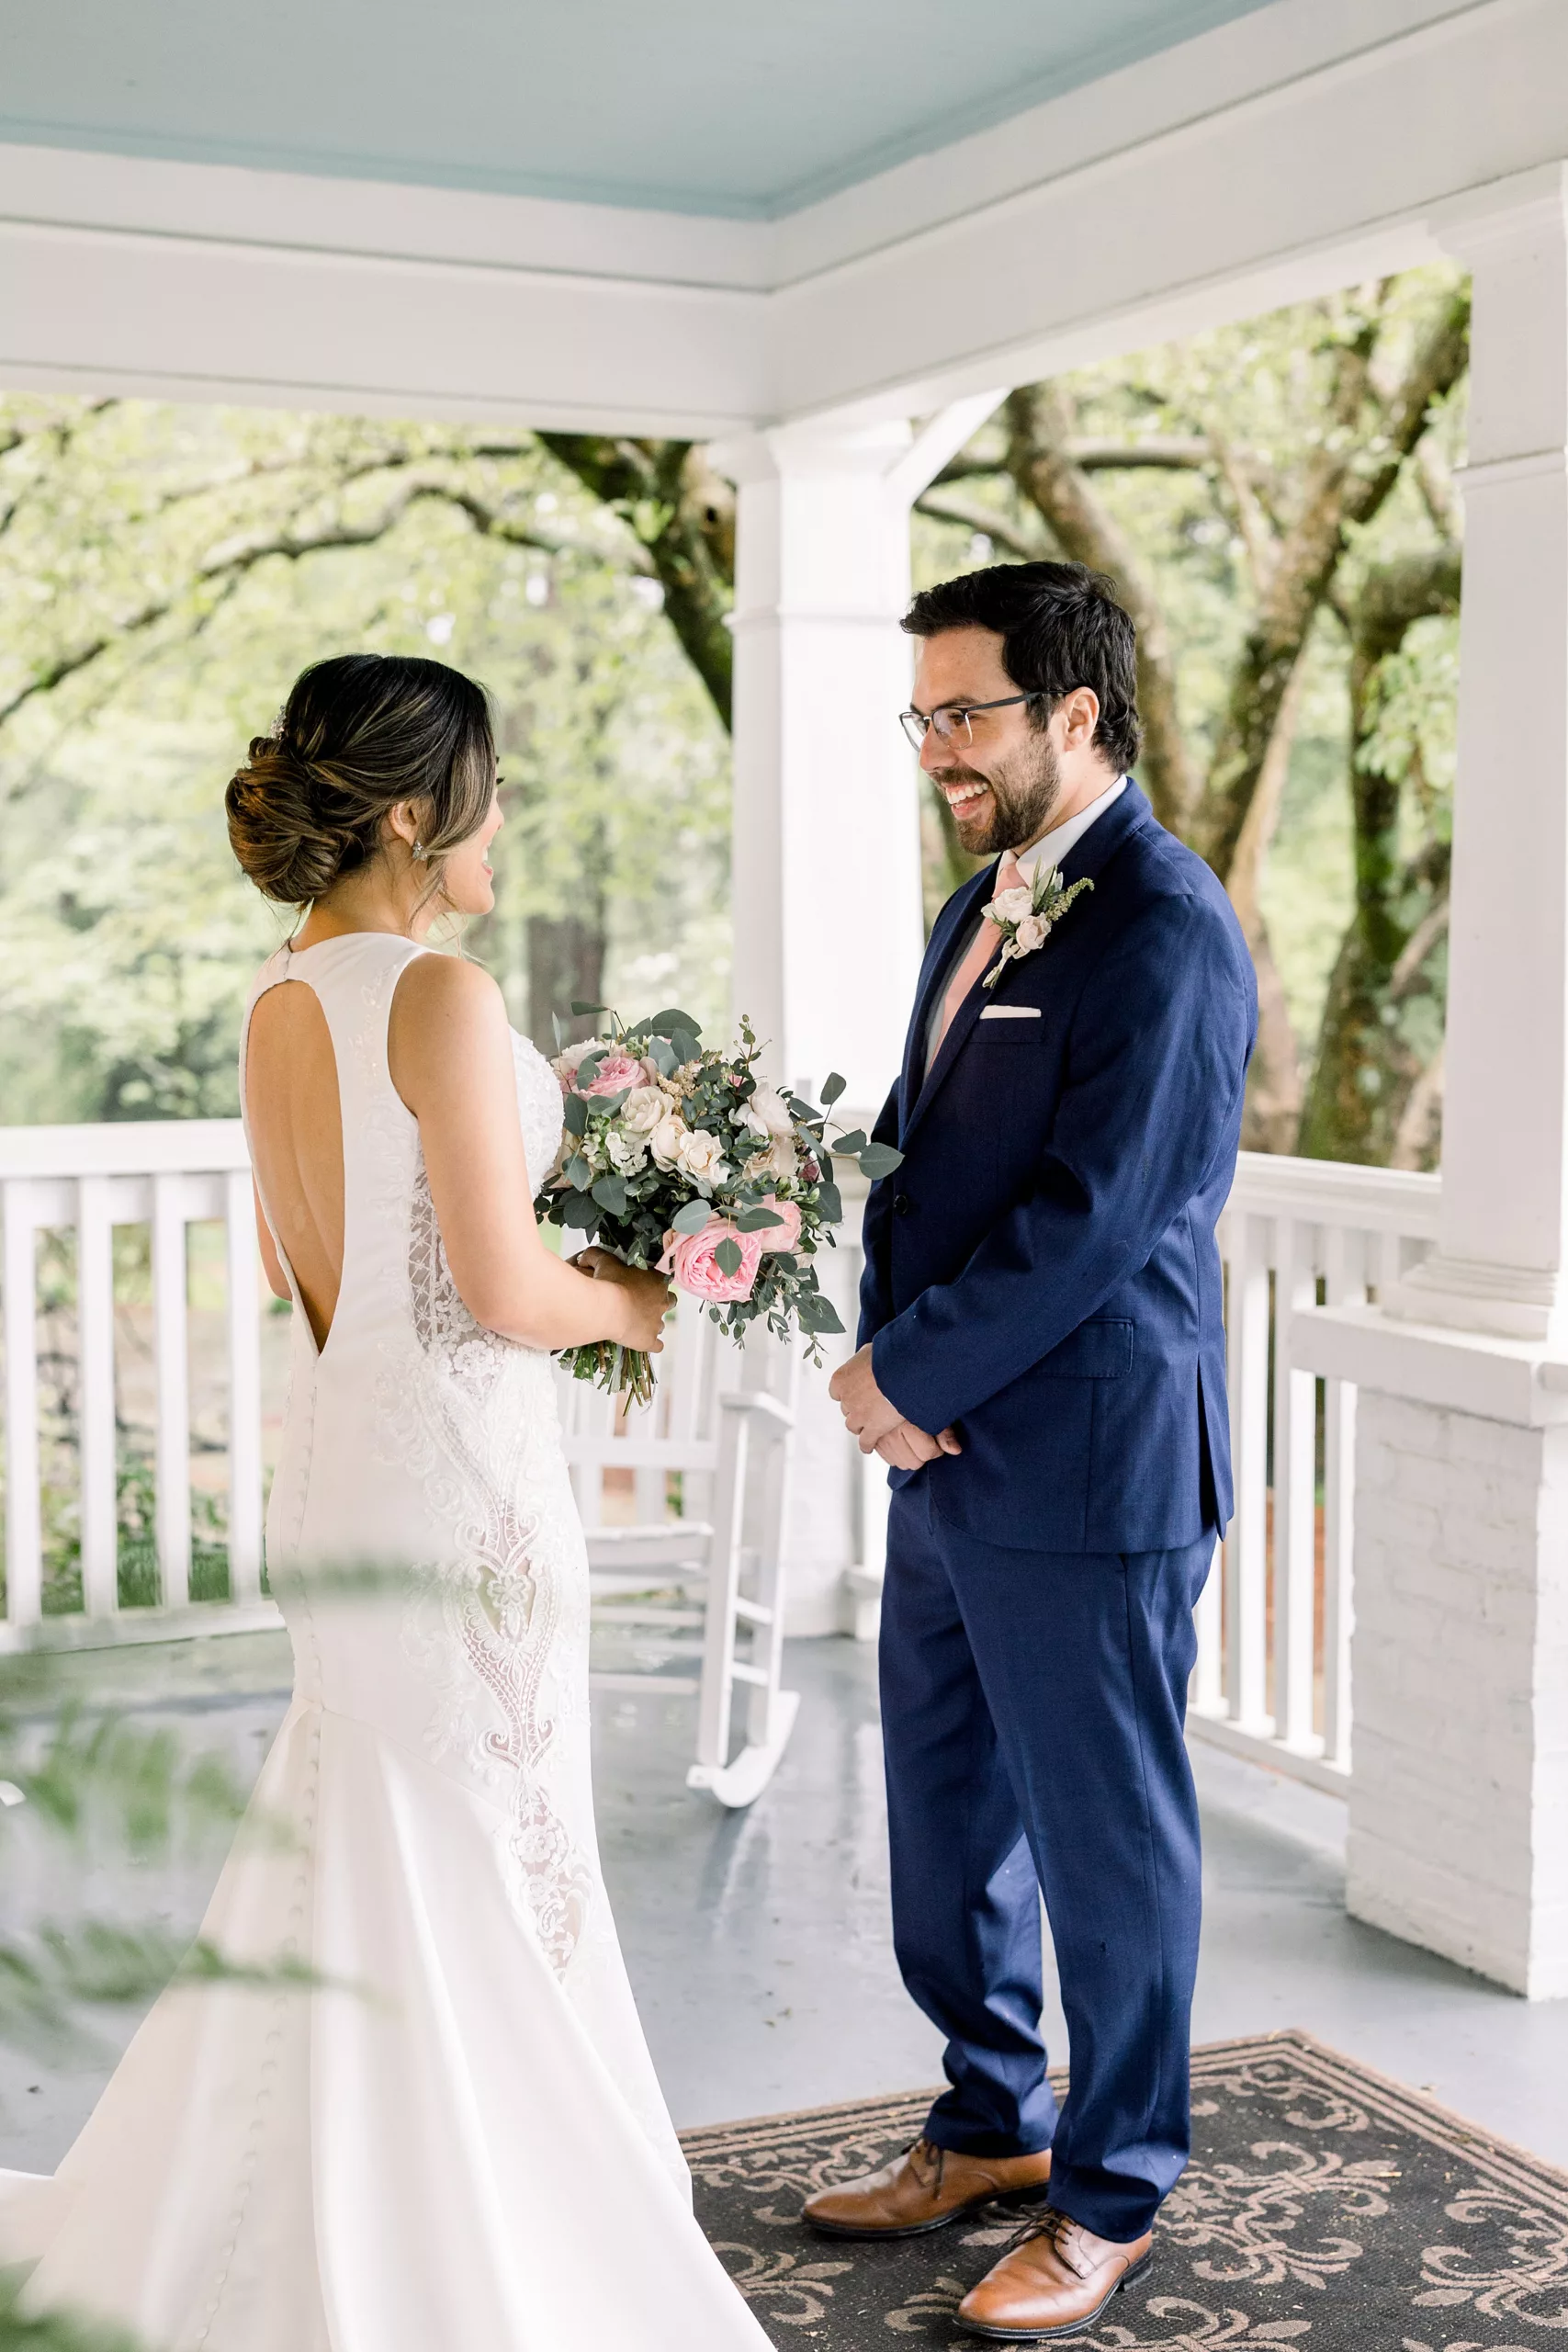 A bride and groom chat and stand together on a porch as he sees her in her dress for the first time during their first look wedding